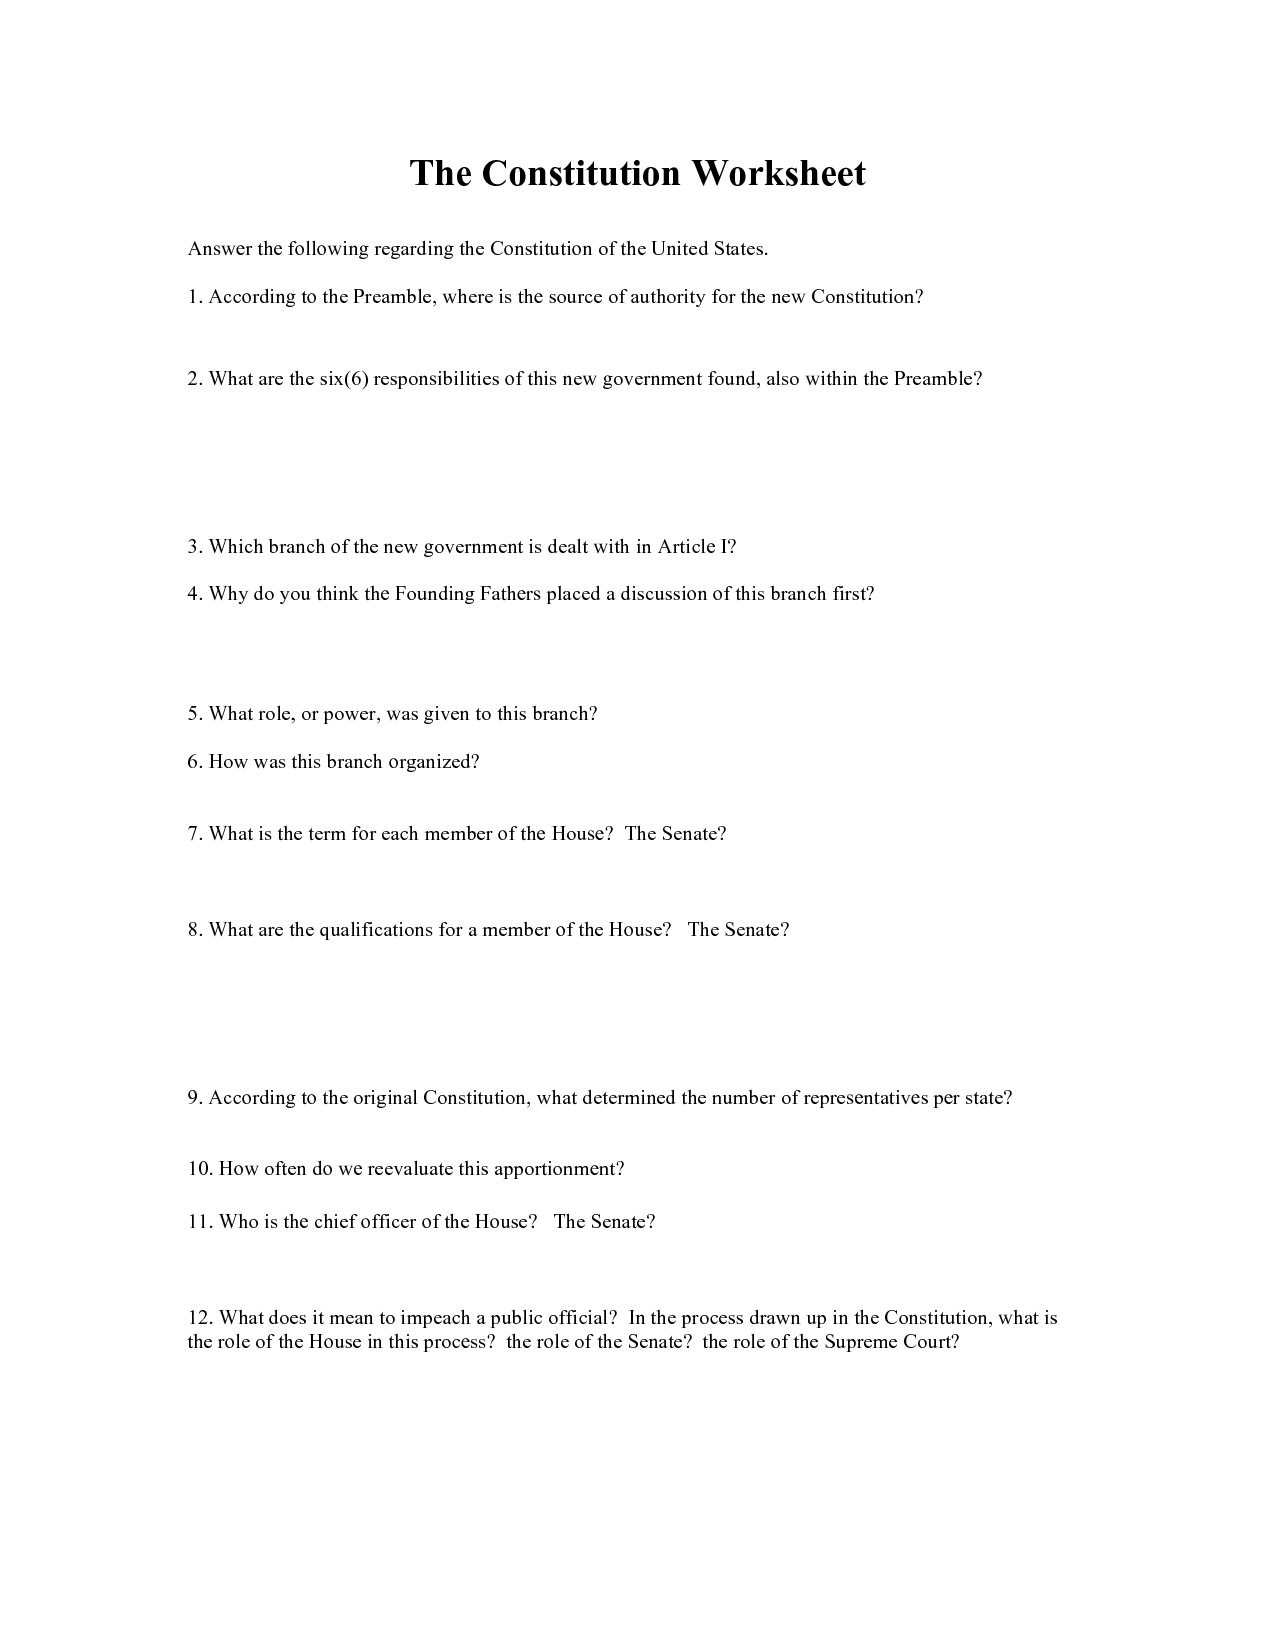 The Constitution Worksheet Answers